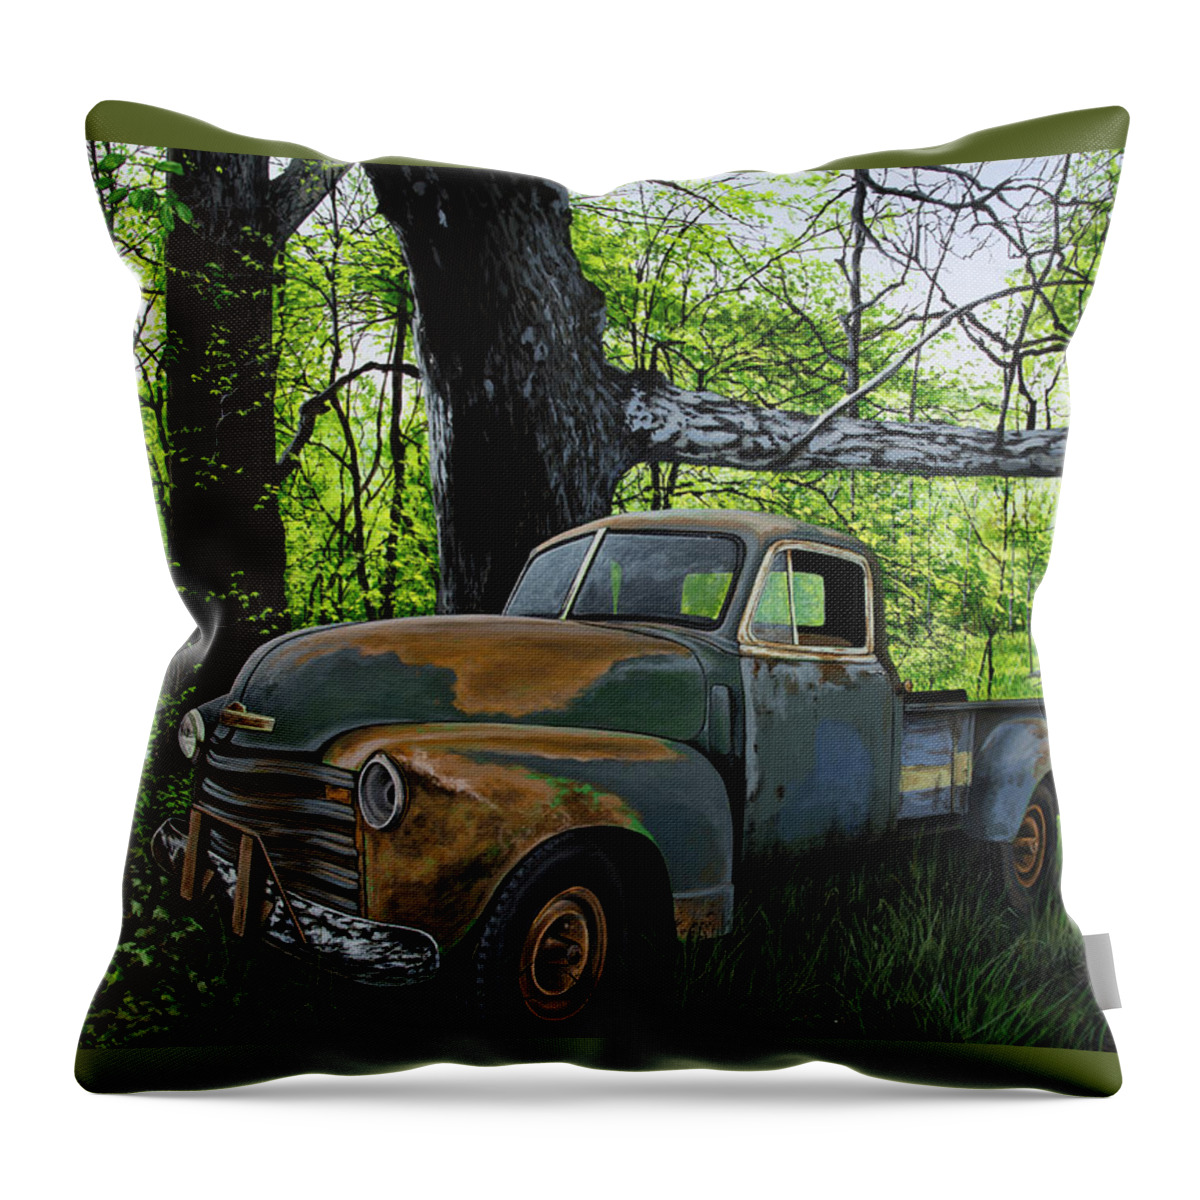  Throw Pillow featuring the painting The Ol' Mushroom Hauler by Anthony J Padgett